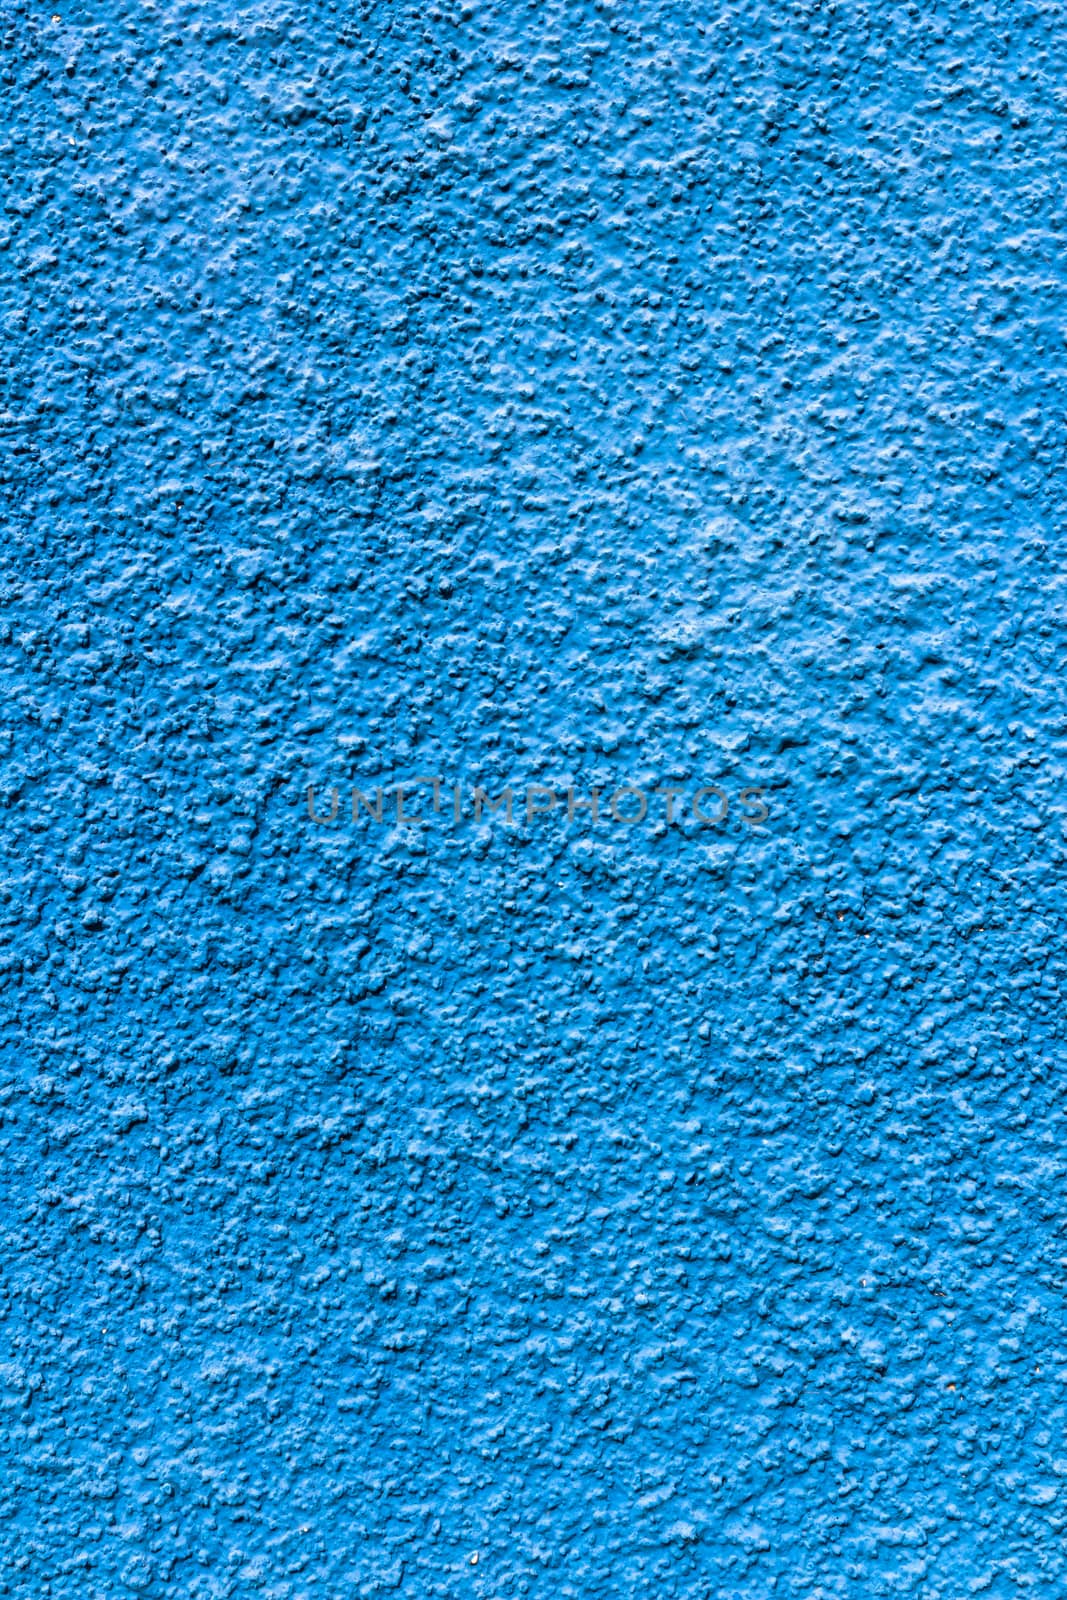 Abstract deep blue wall plastered texture. Rustic background.